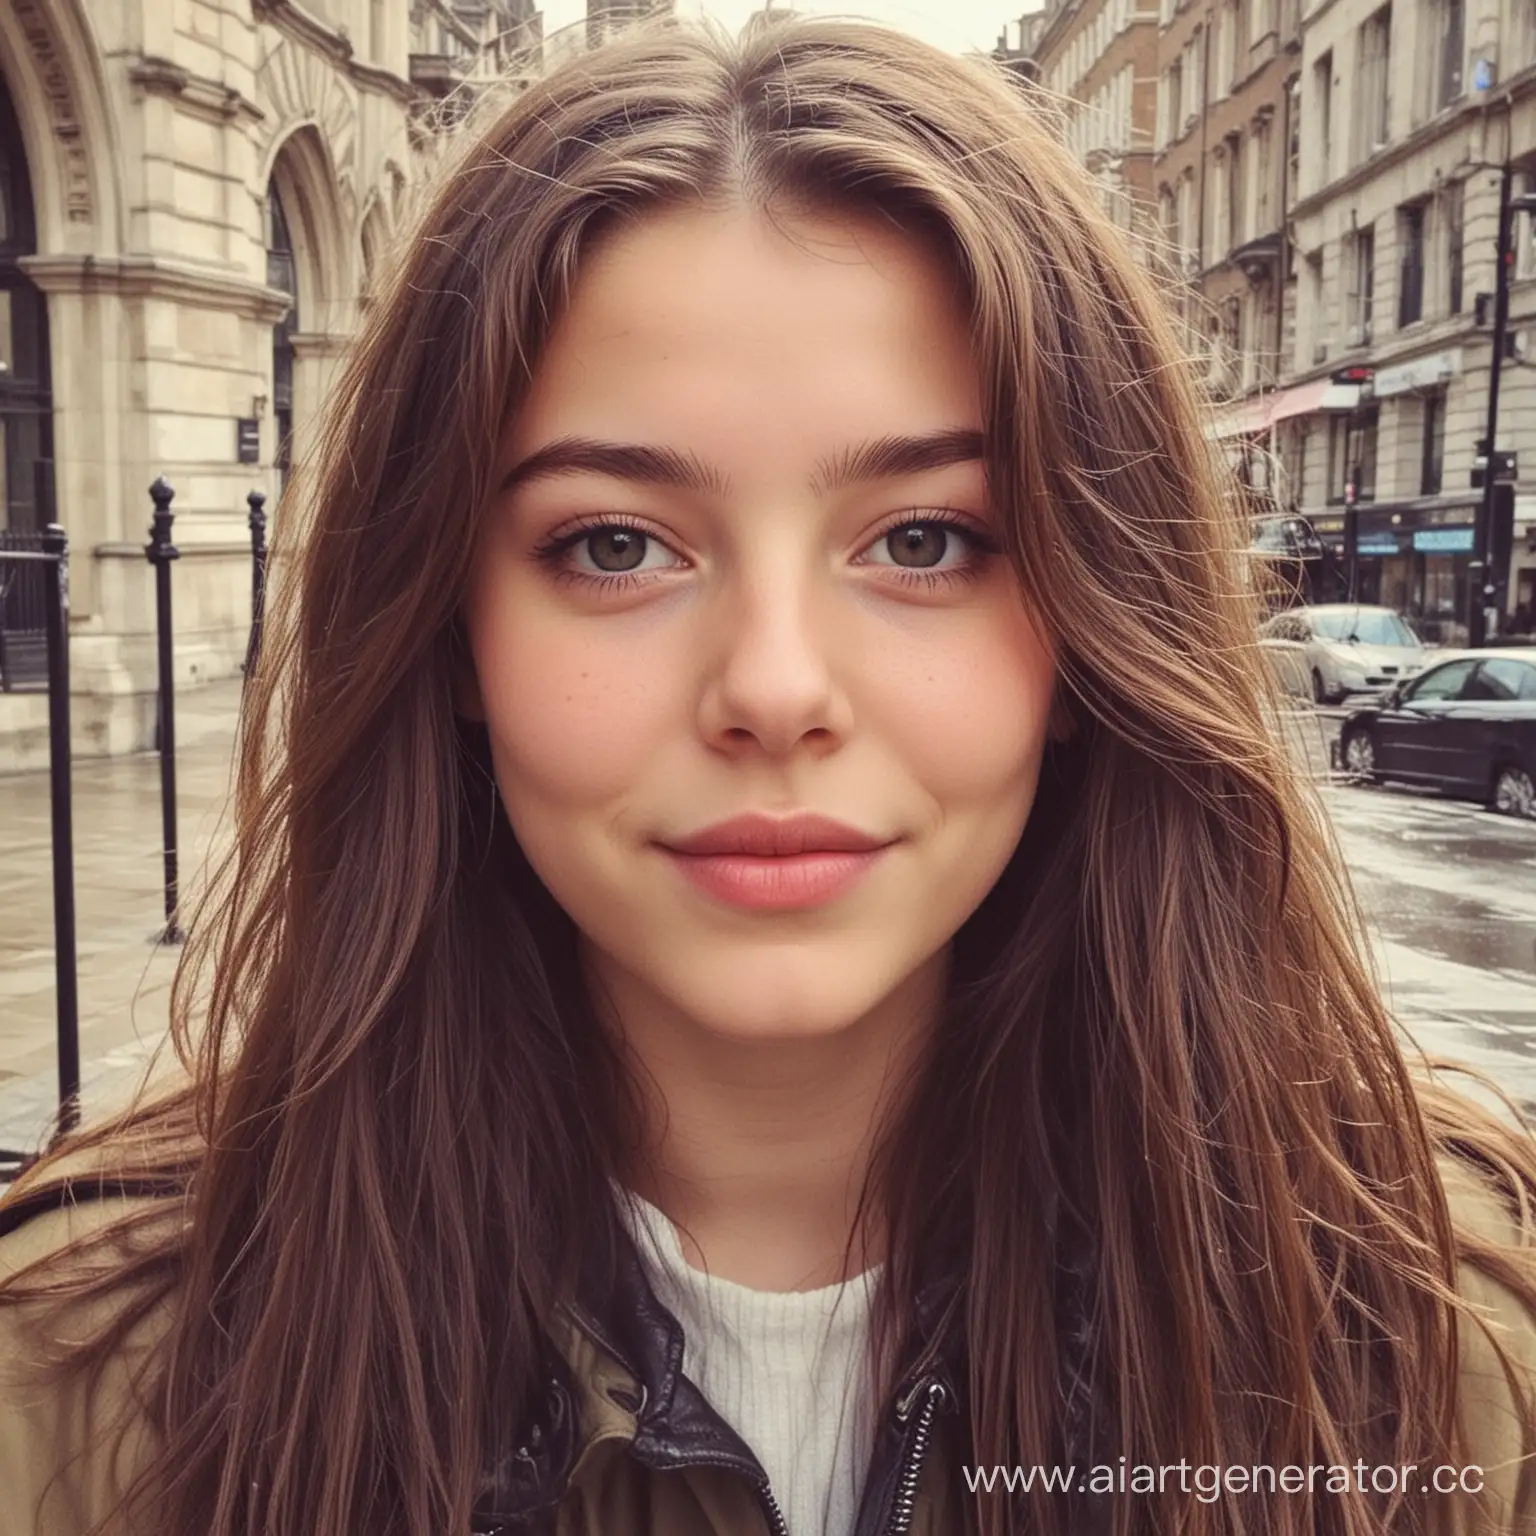 Young-Woman-Michelle-Born-in-Rainy-London-England